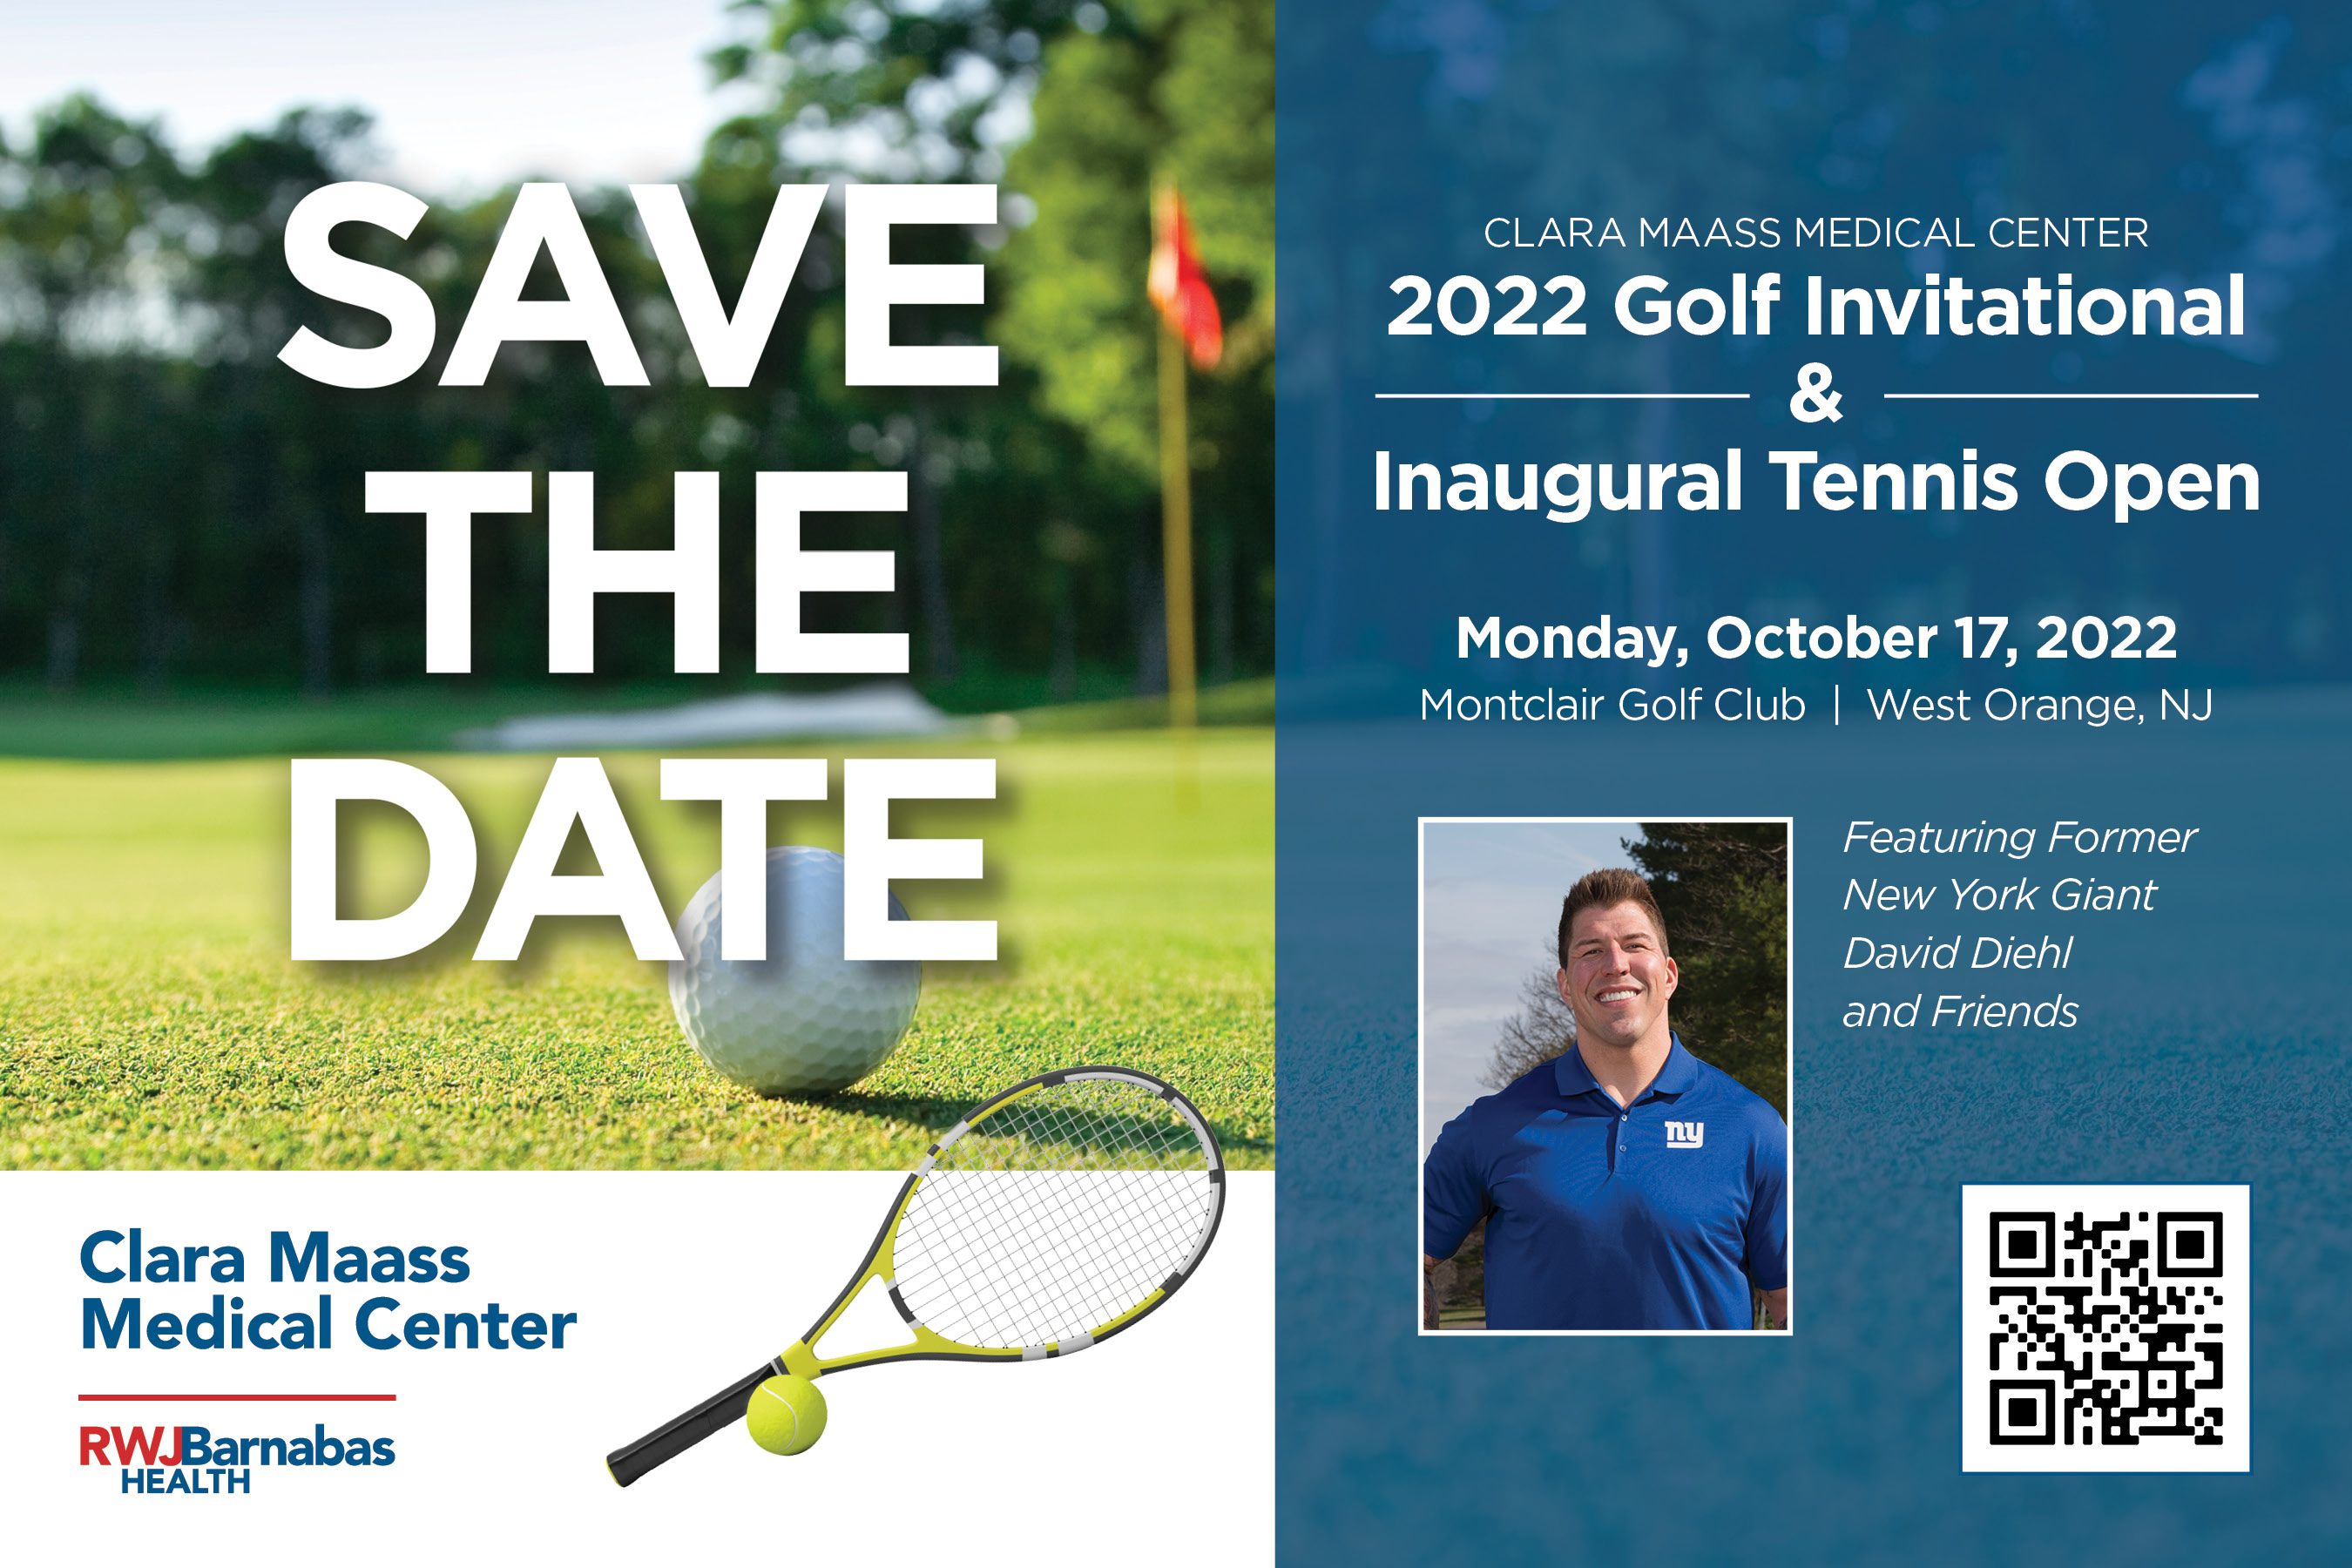 2022 Golf & Tennis Save The Date - Monday, October 17, 2022